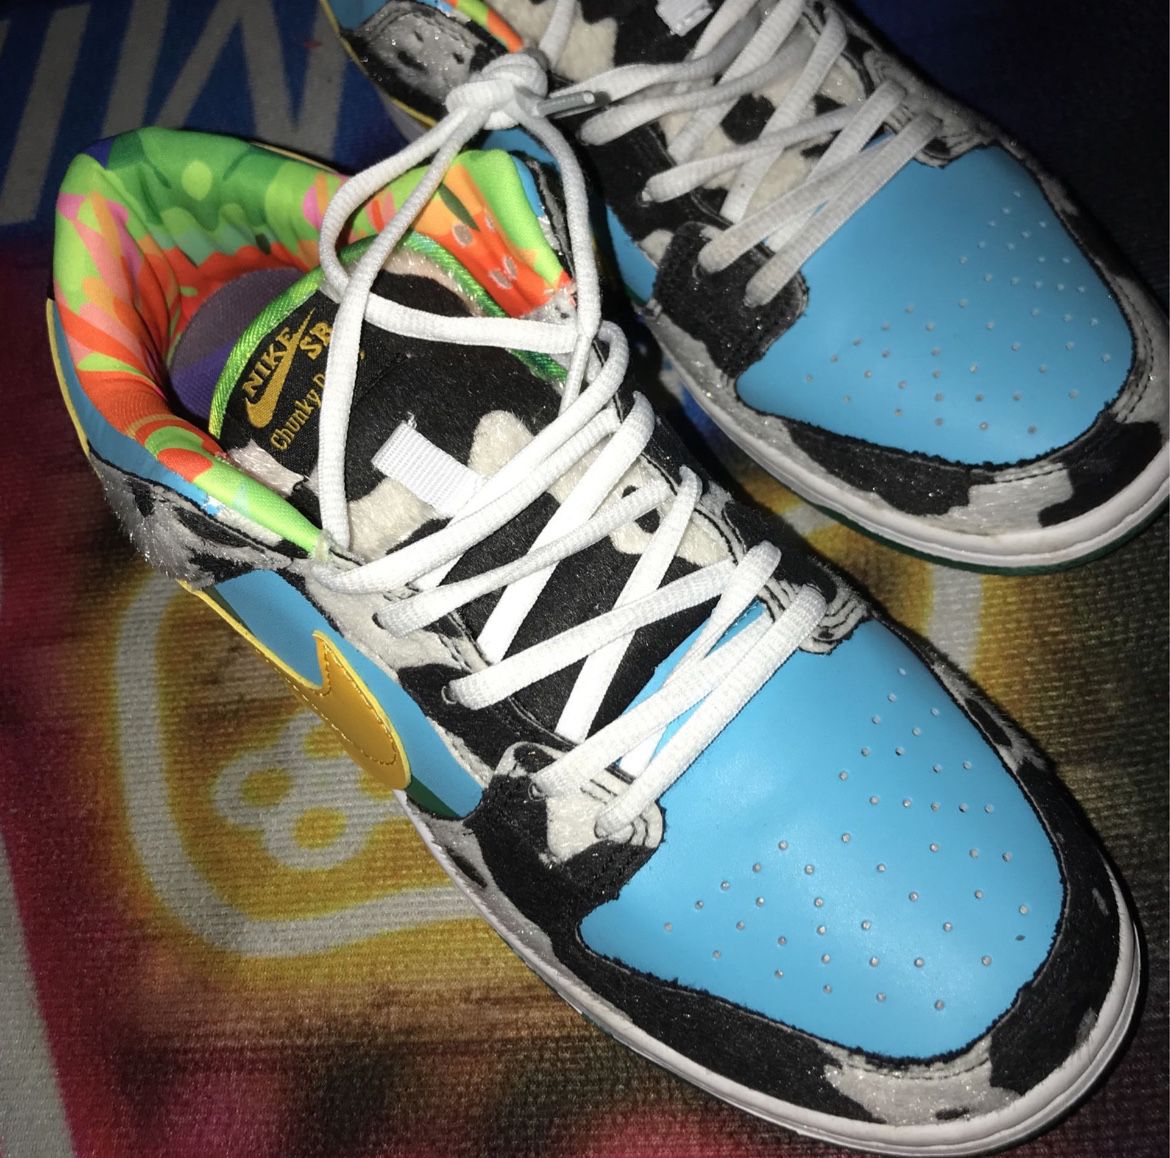 Ben & Jerry Dunks Size 9.5 Need Gone